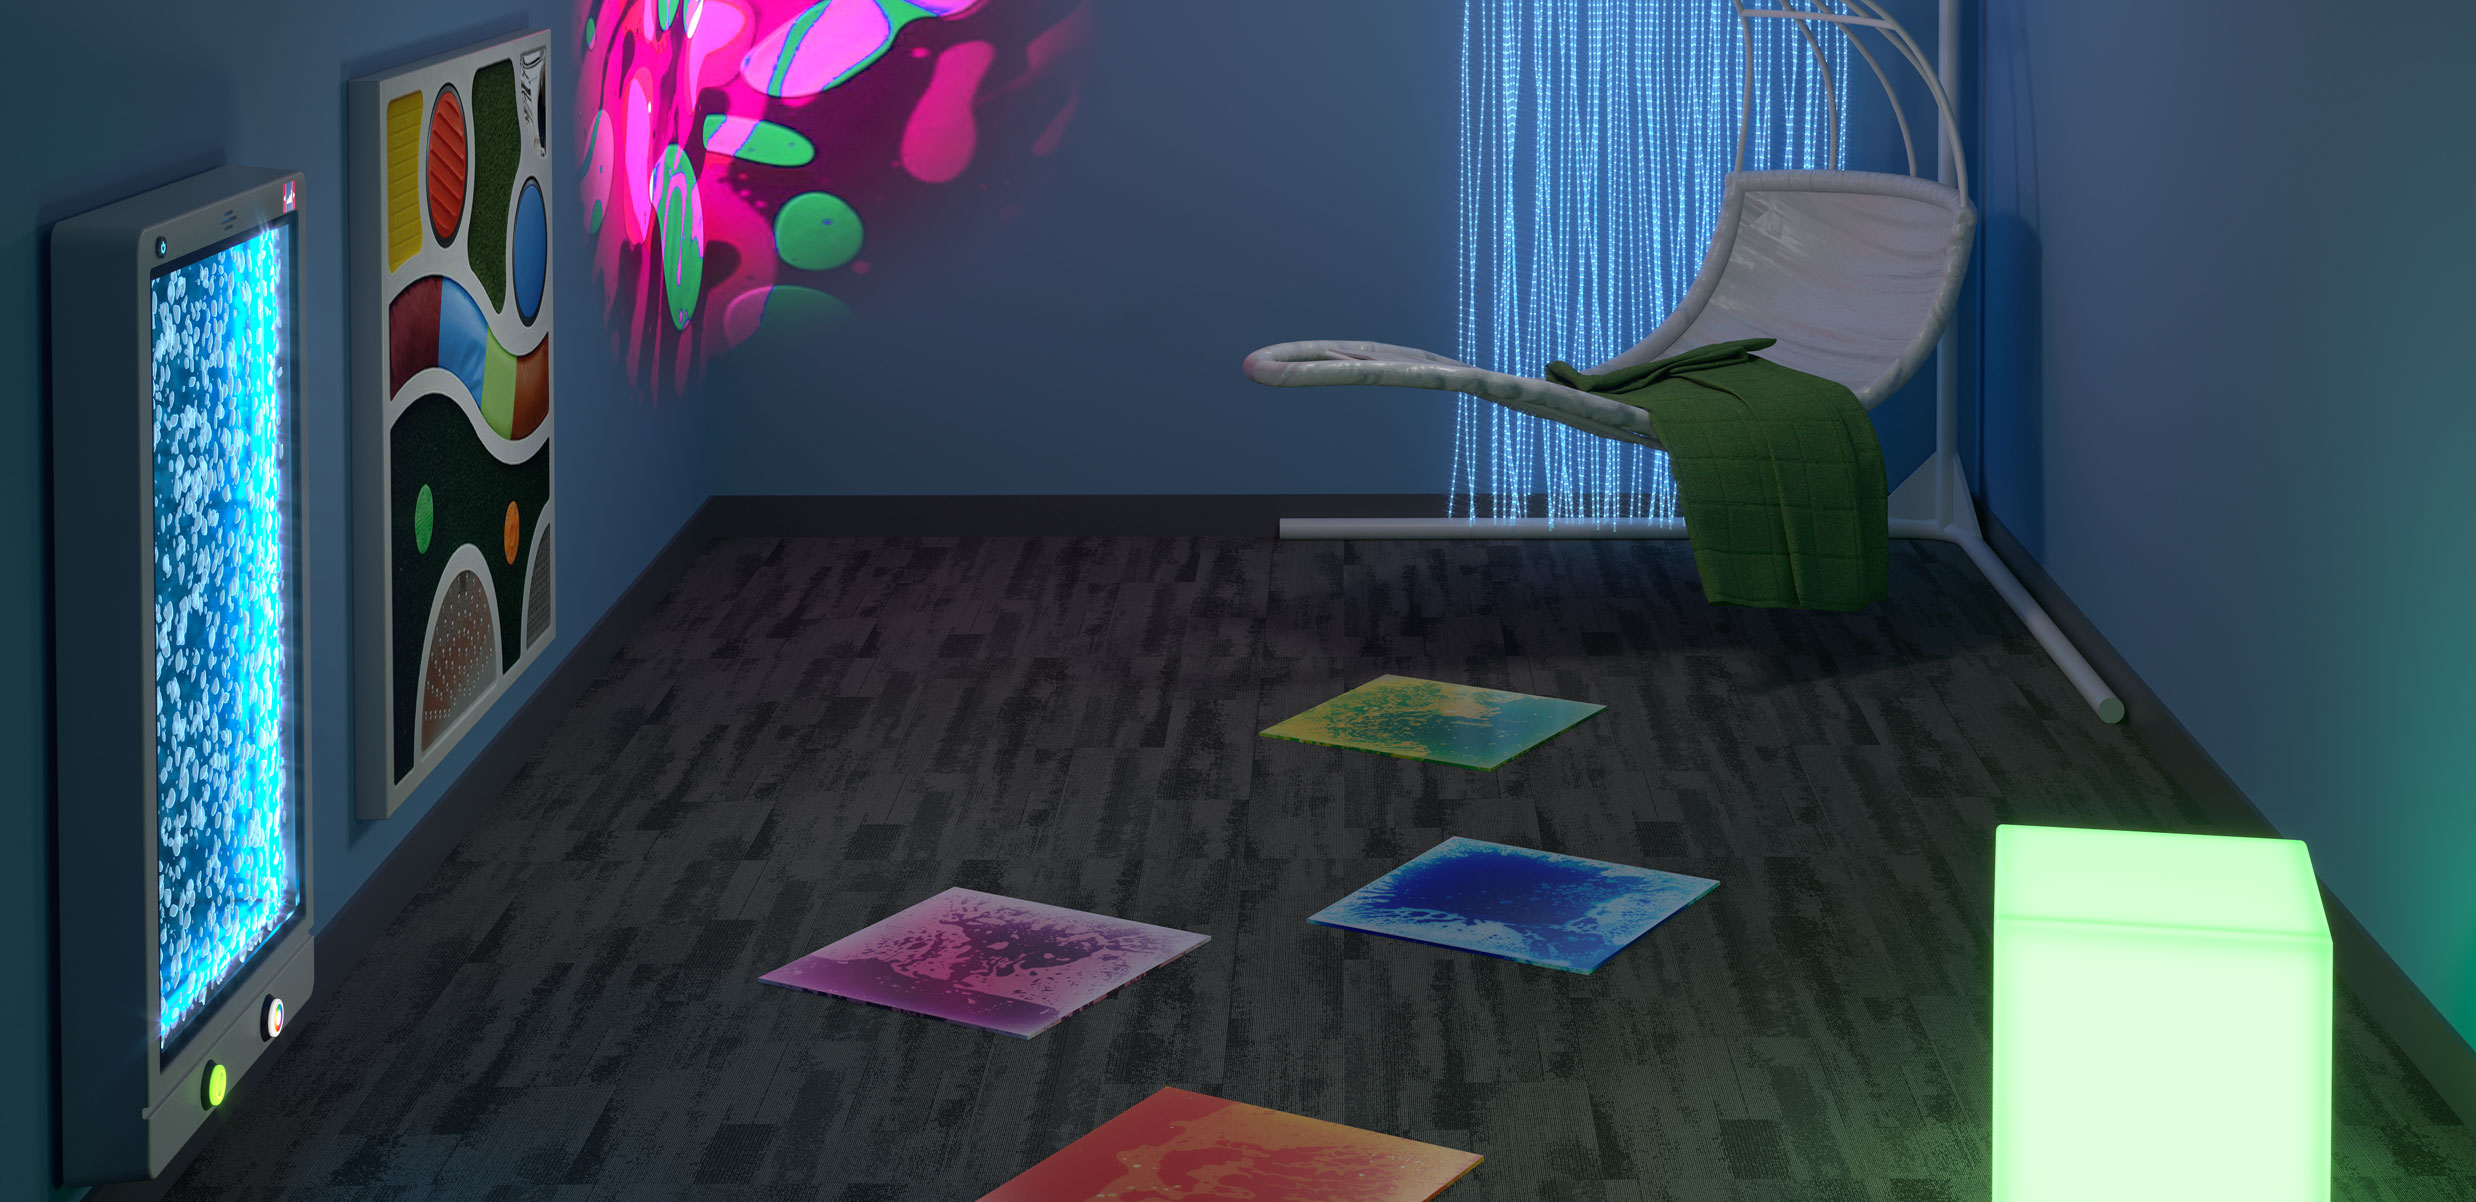 darkened room with glowing furniture and objects